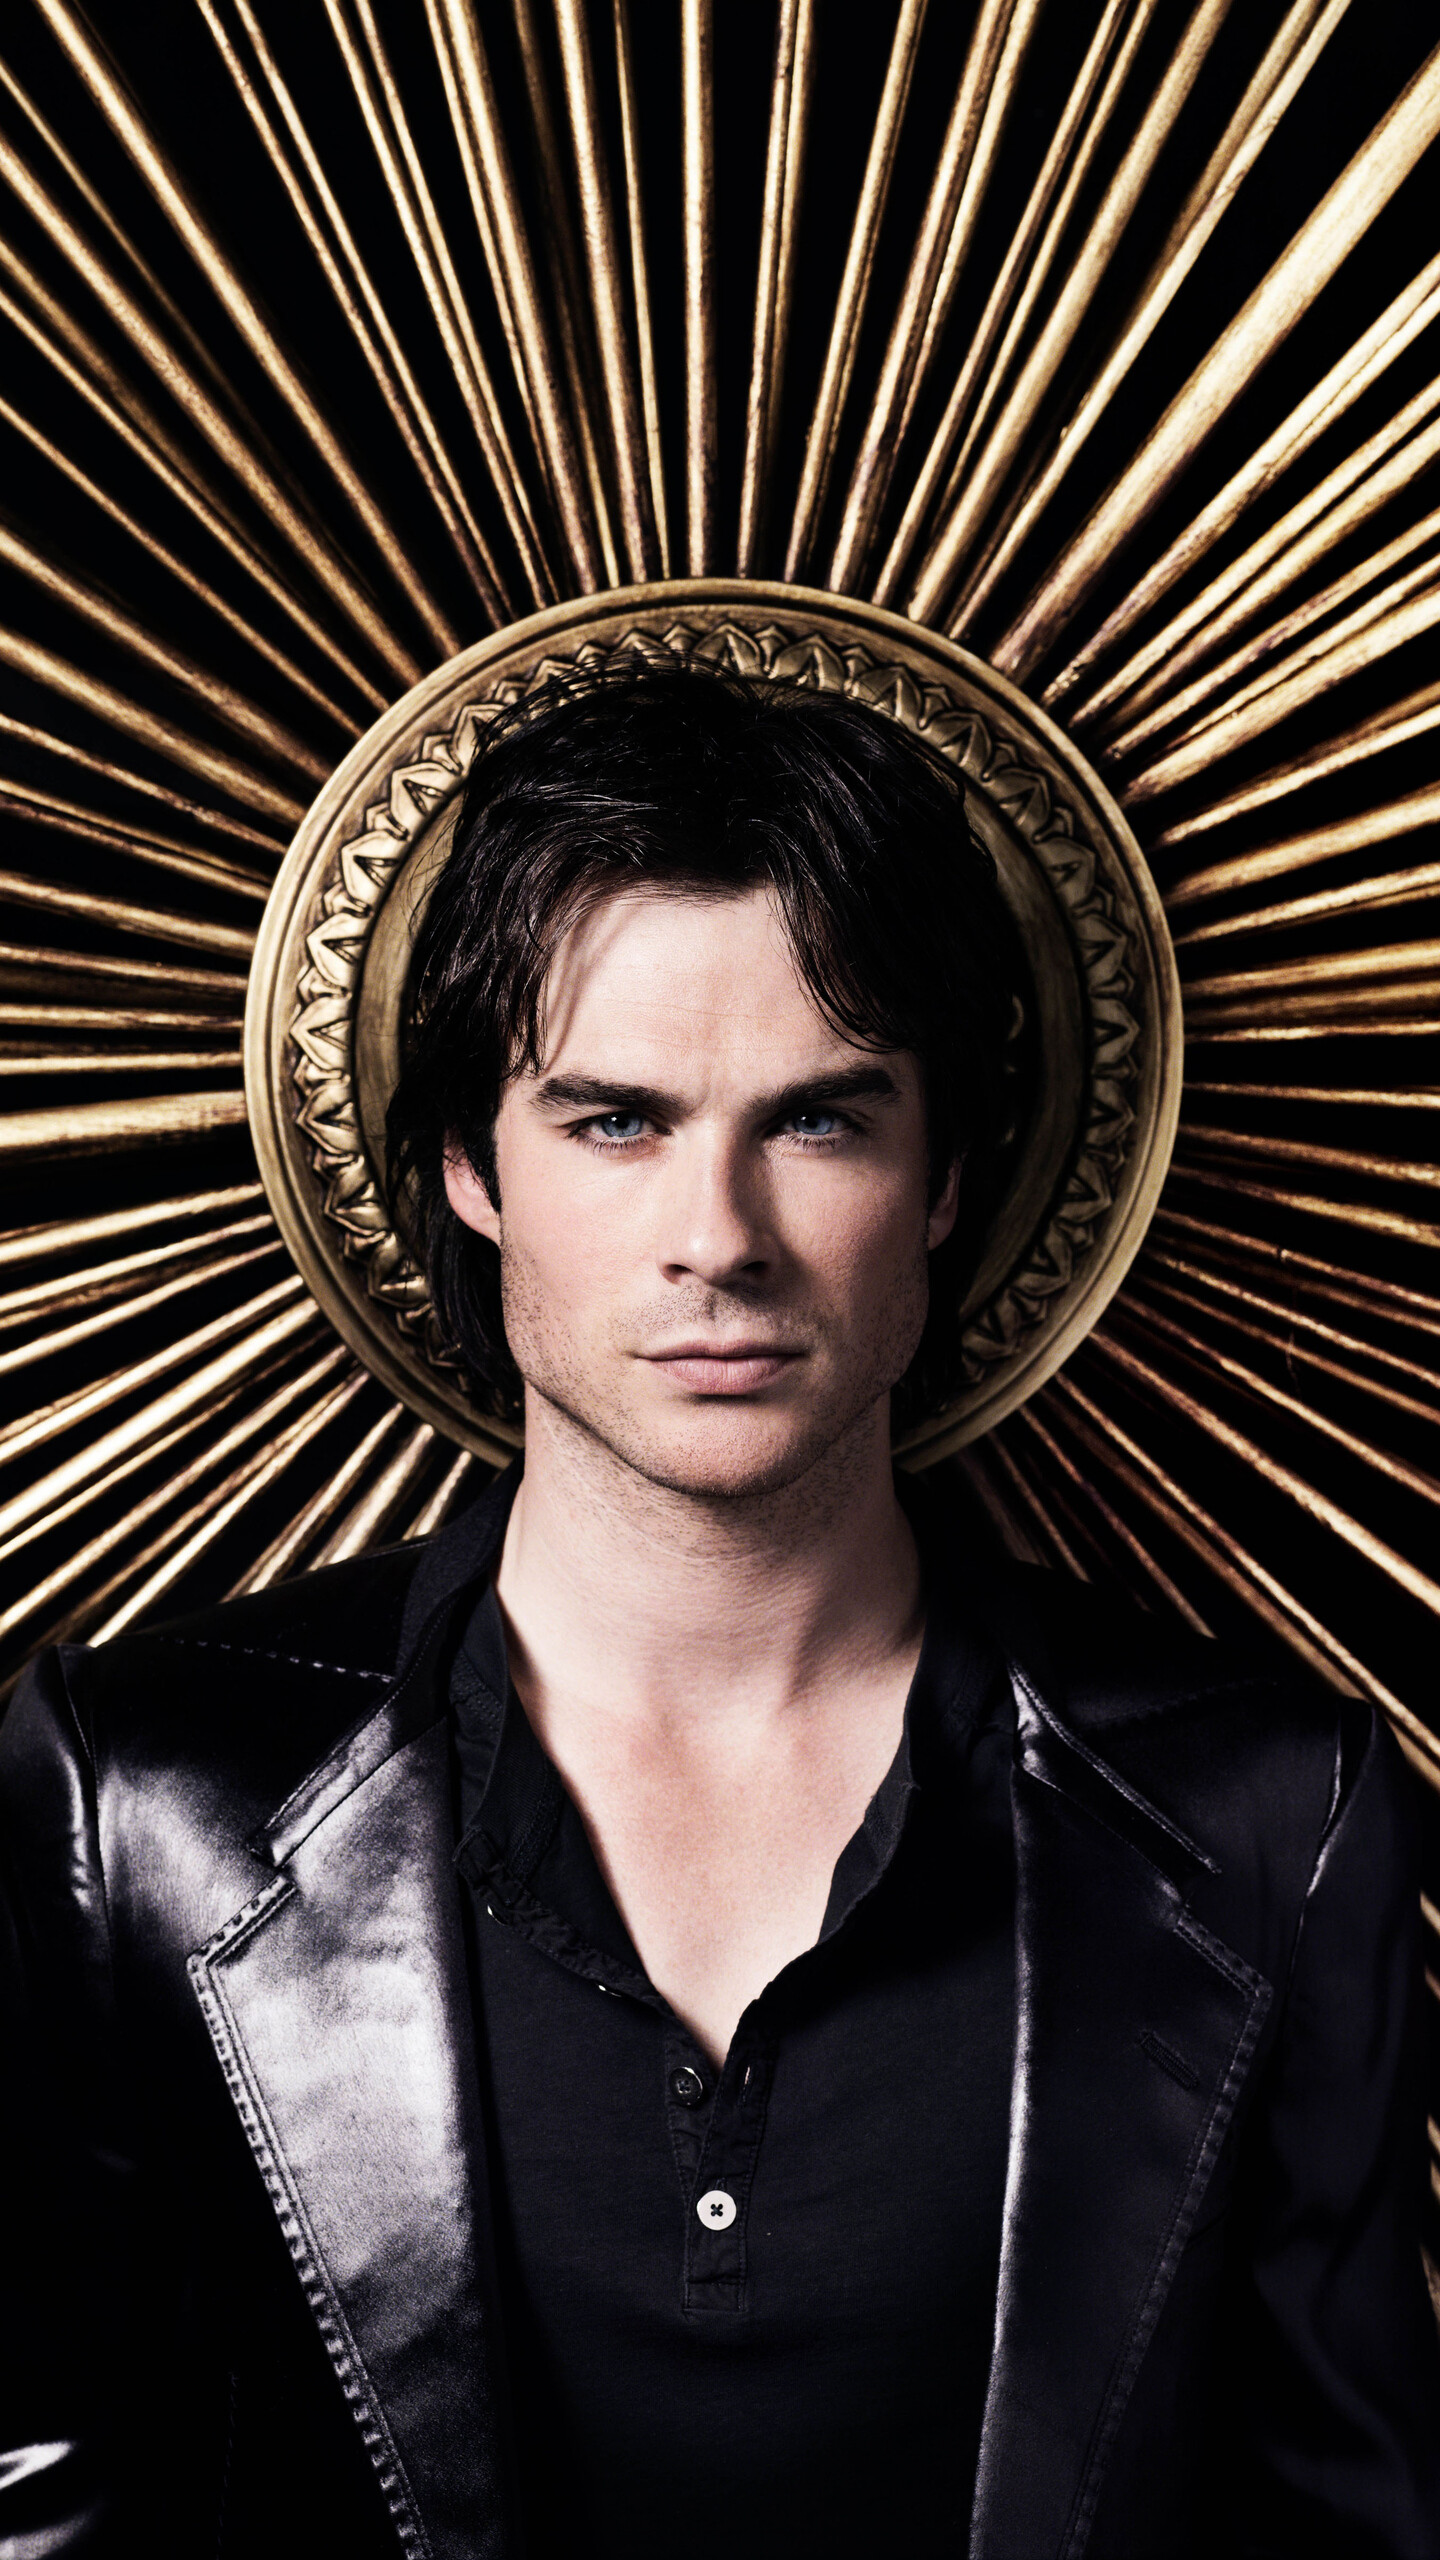 The Vampire Diaries (TV Series): Ian Somerhalder, Damon Salvatore, American Actor And Model, Known For Playing Boone Carlyle In The TV Drama "Lost". 1440x2560 HD Background.